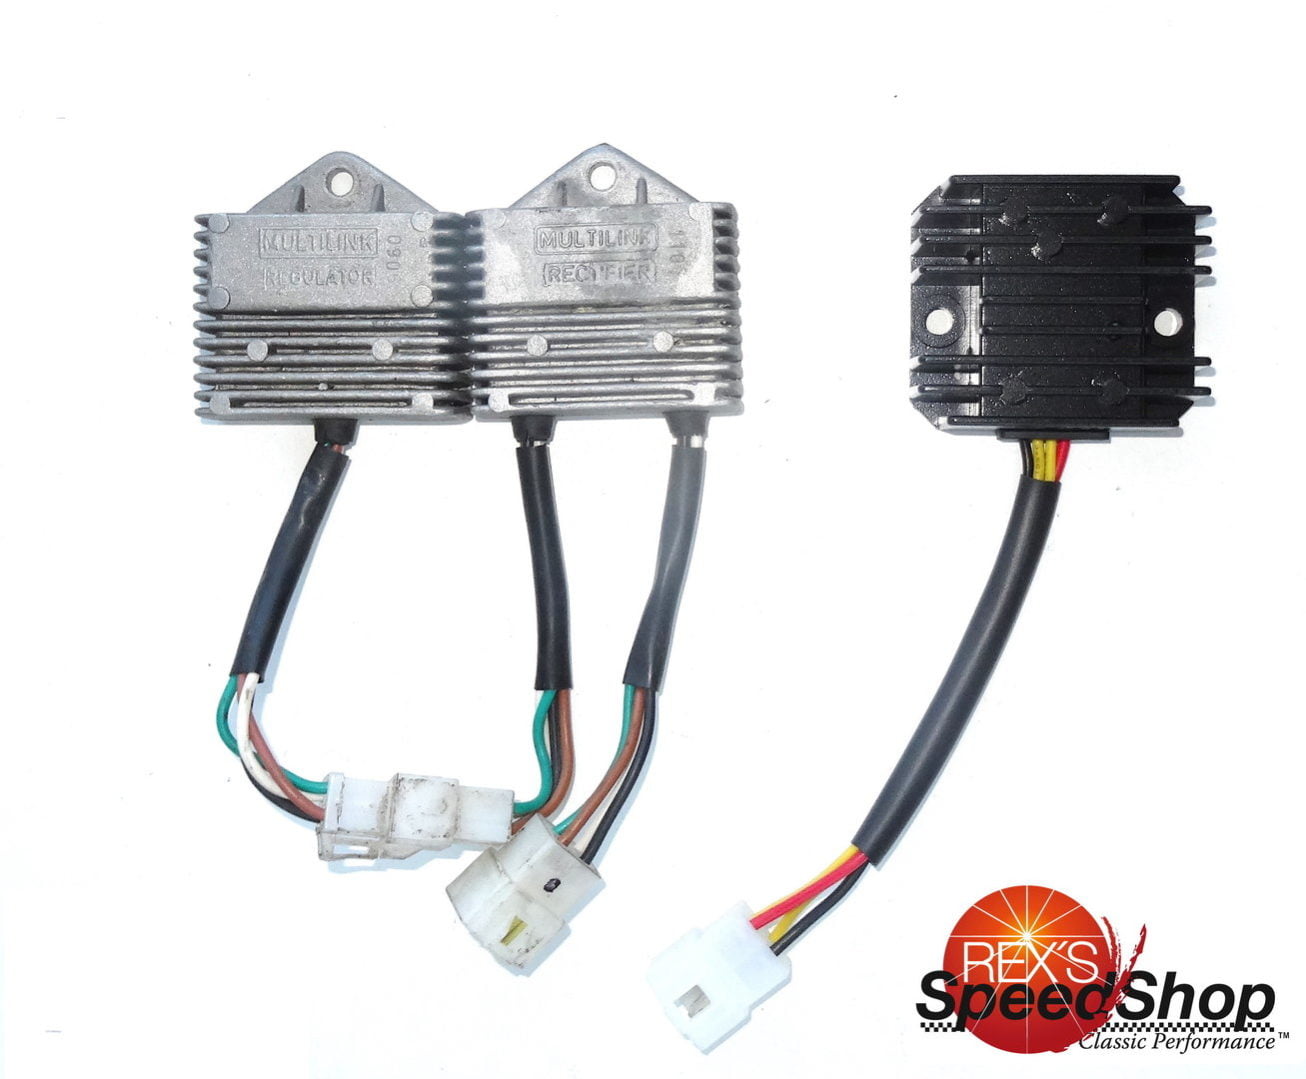 COMBINED Details about   5x ROYAL ENFIELD 12V REGULATOR RECTIFIER NEW BRAND 